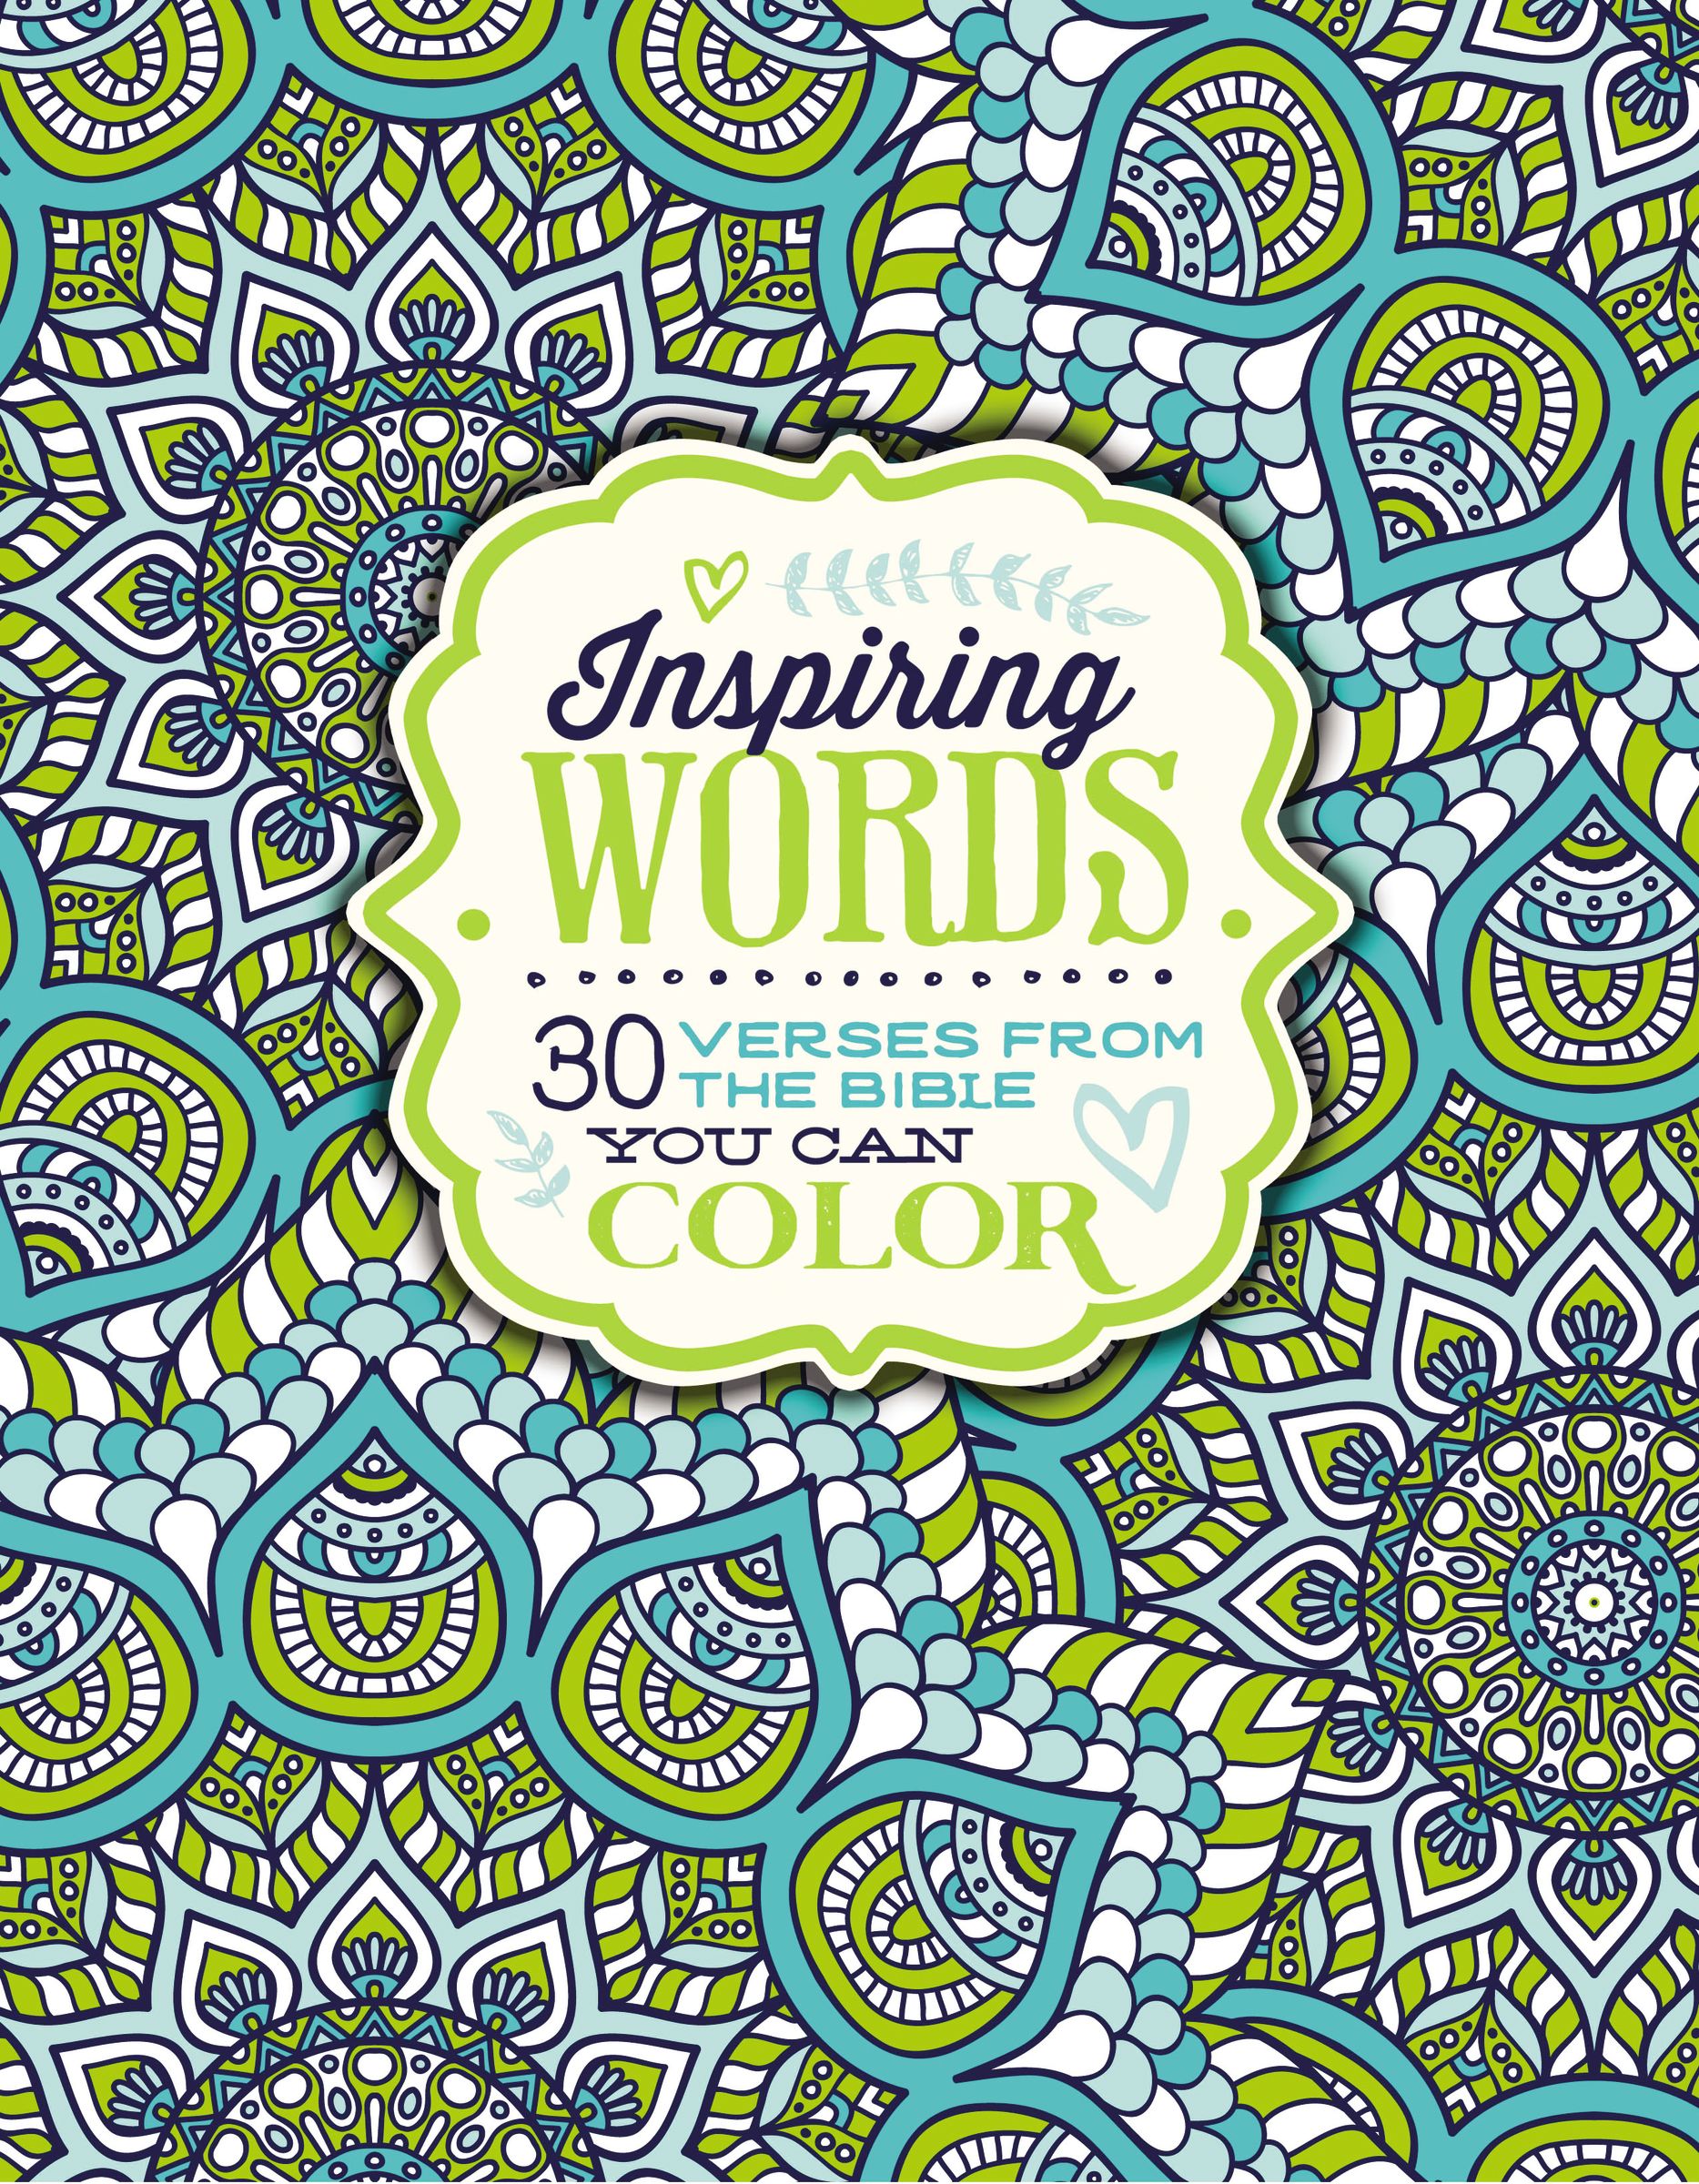 Image of Inspiring Words Colouring Book other